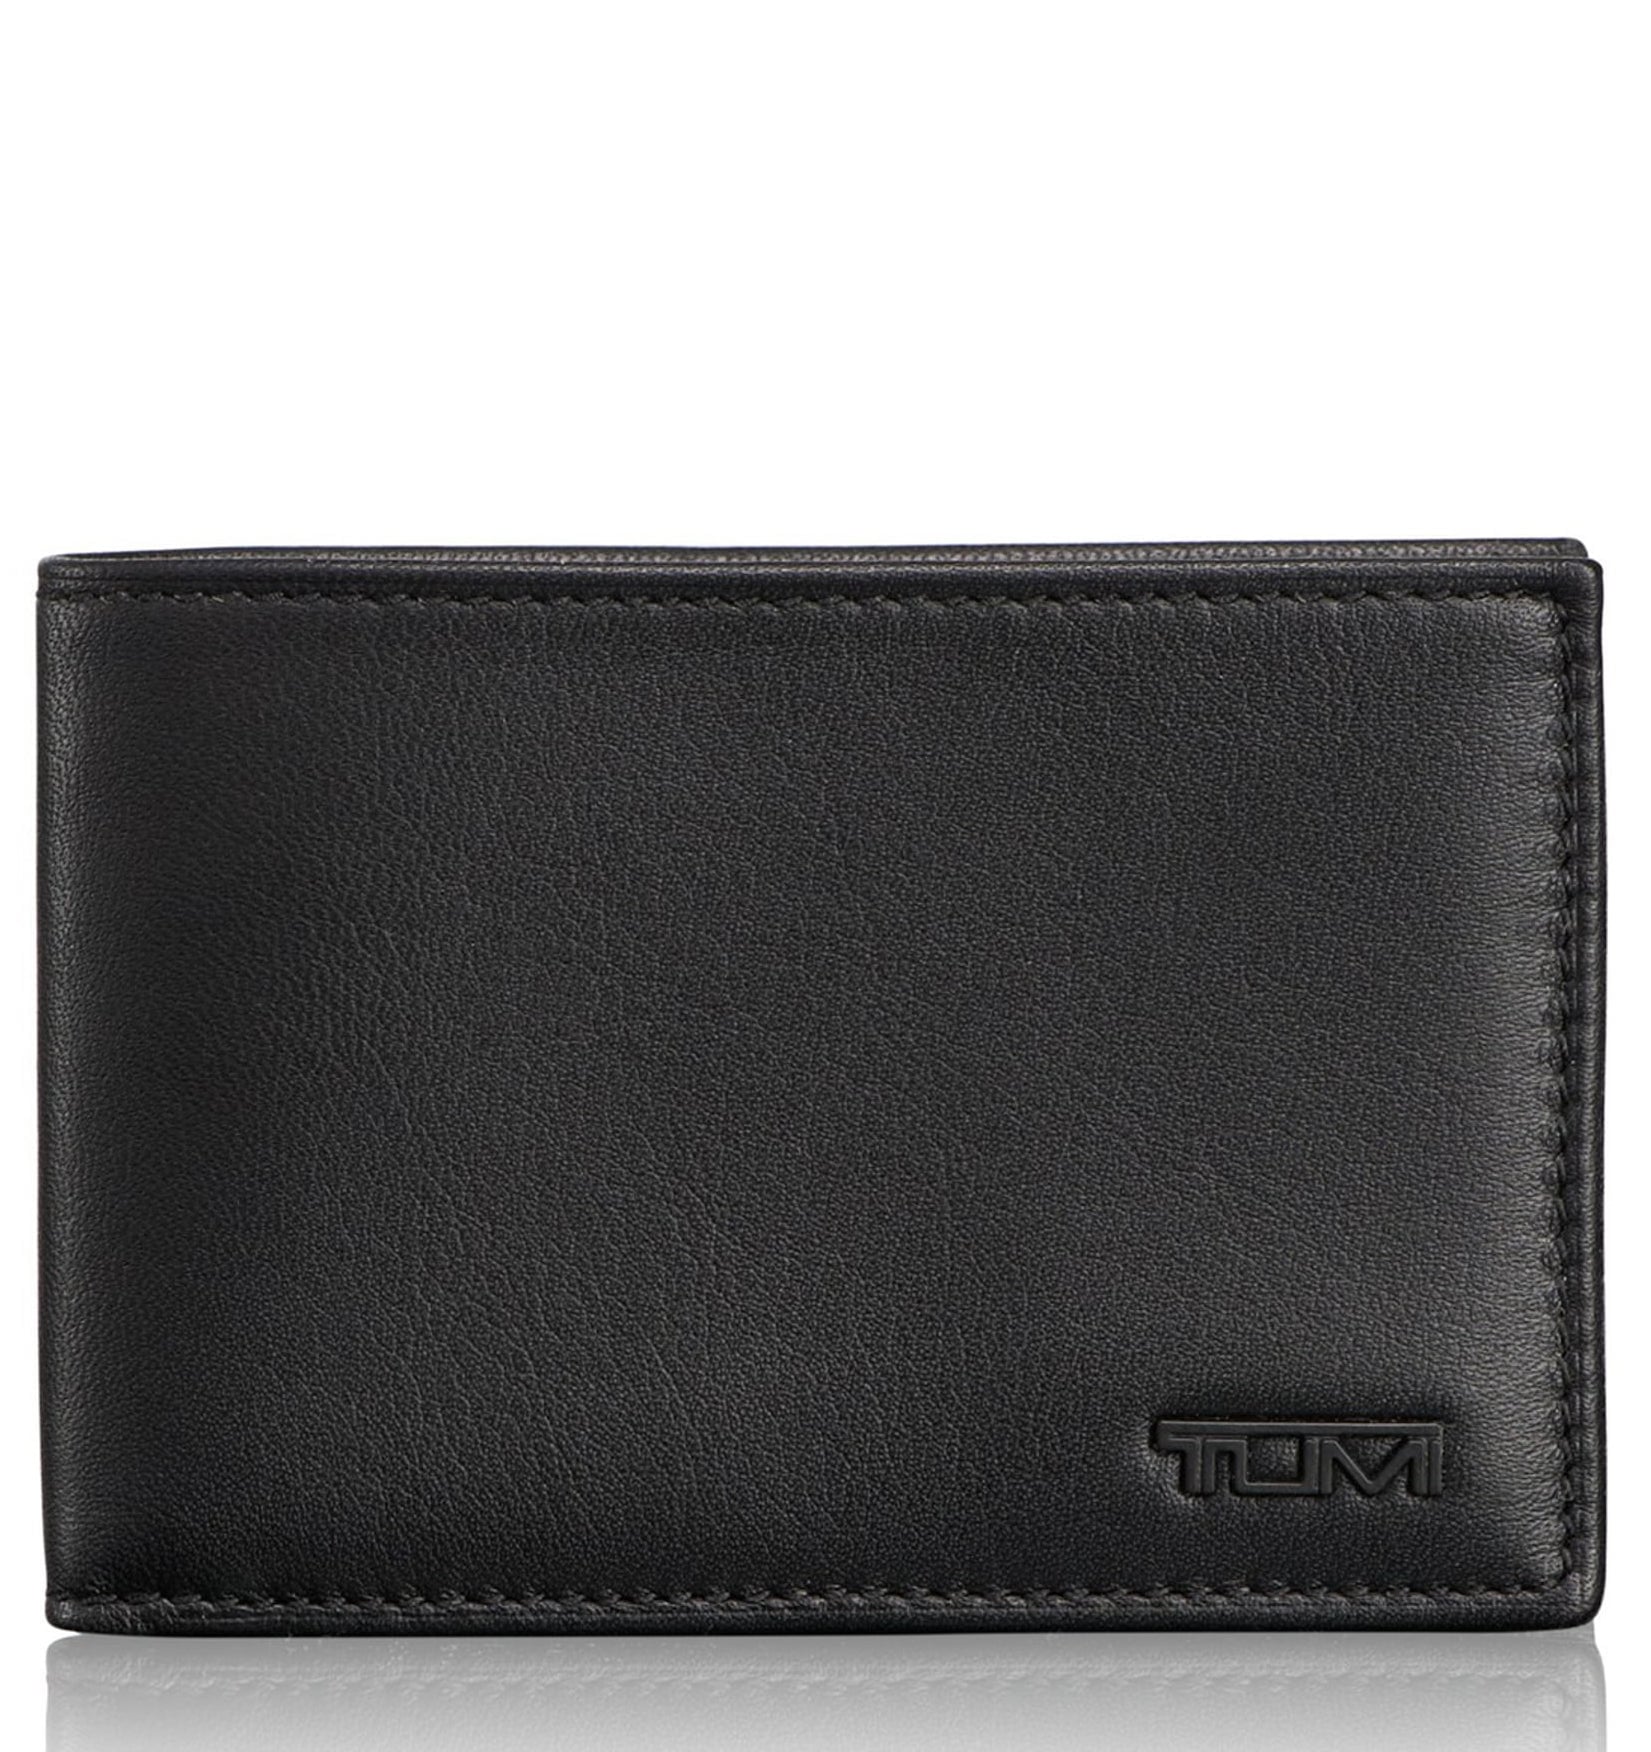 Tumi Delta ID Lock Shielded Slim Single Billfold Wallet | Cool Gifts Your Dad Will Love This Father's Day | POPSUGAR Smart Living Photo